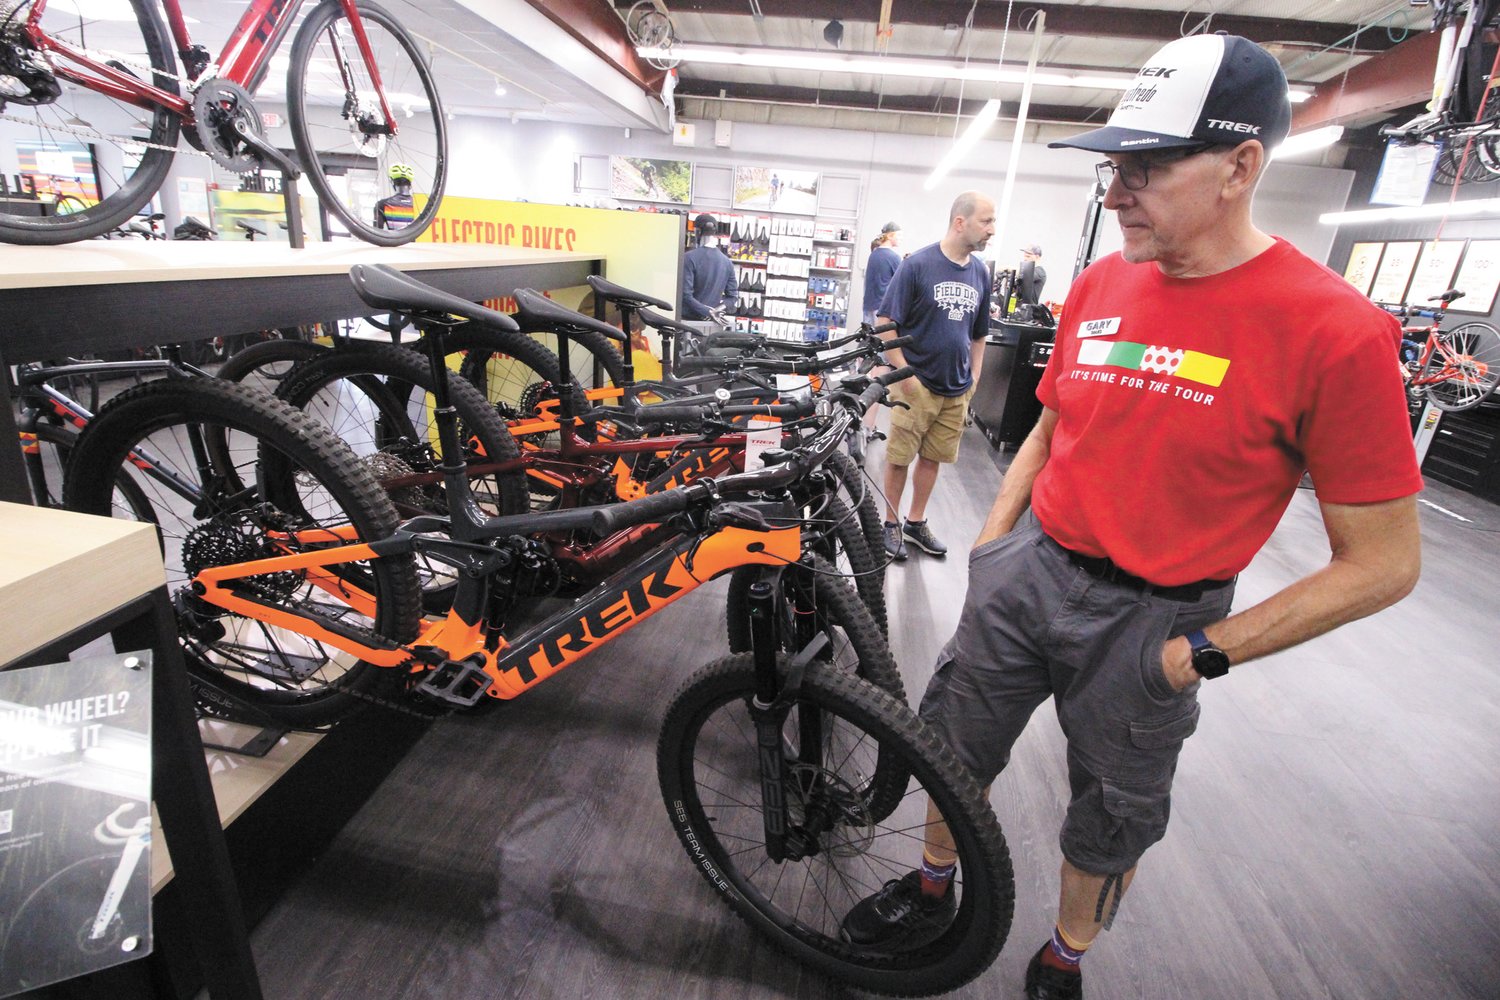 PEDAL POWER: Gary Stafford, a sales representative at Trek Bicycle Warwick shows of a mountain E-bike which can cost about $8,000. (Beacon Communications photos)